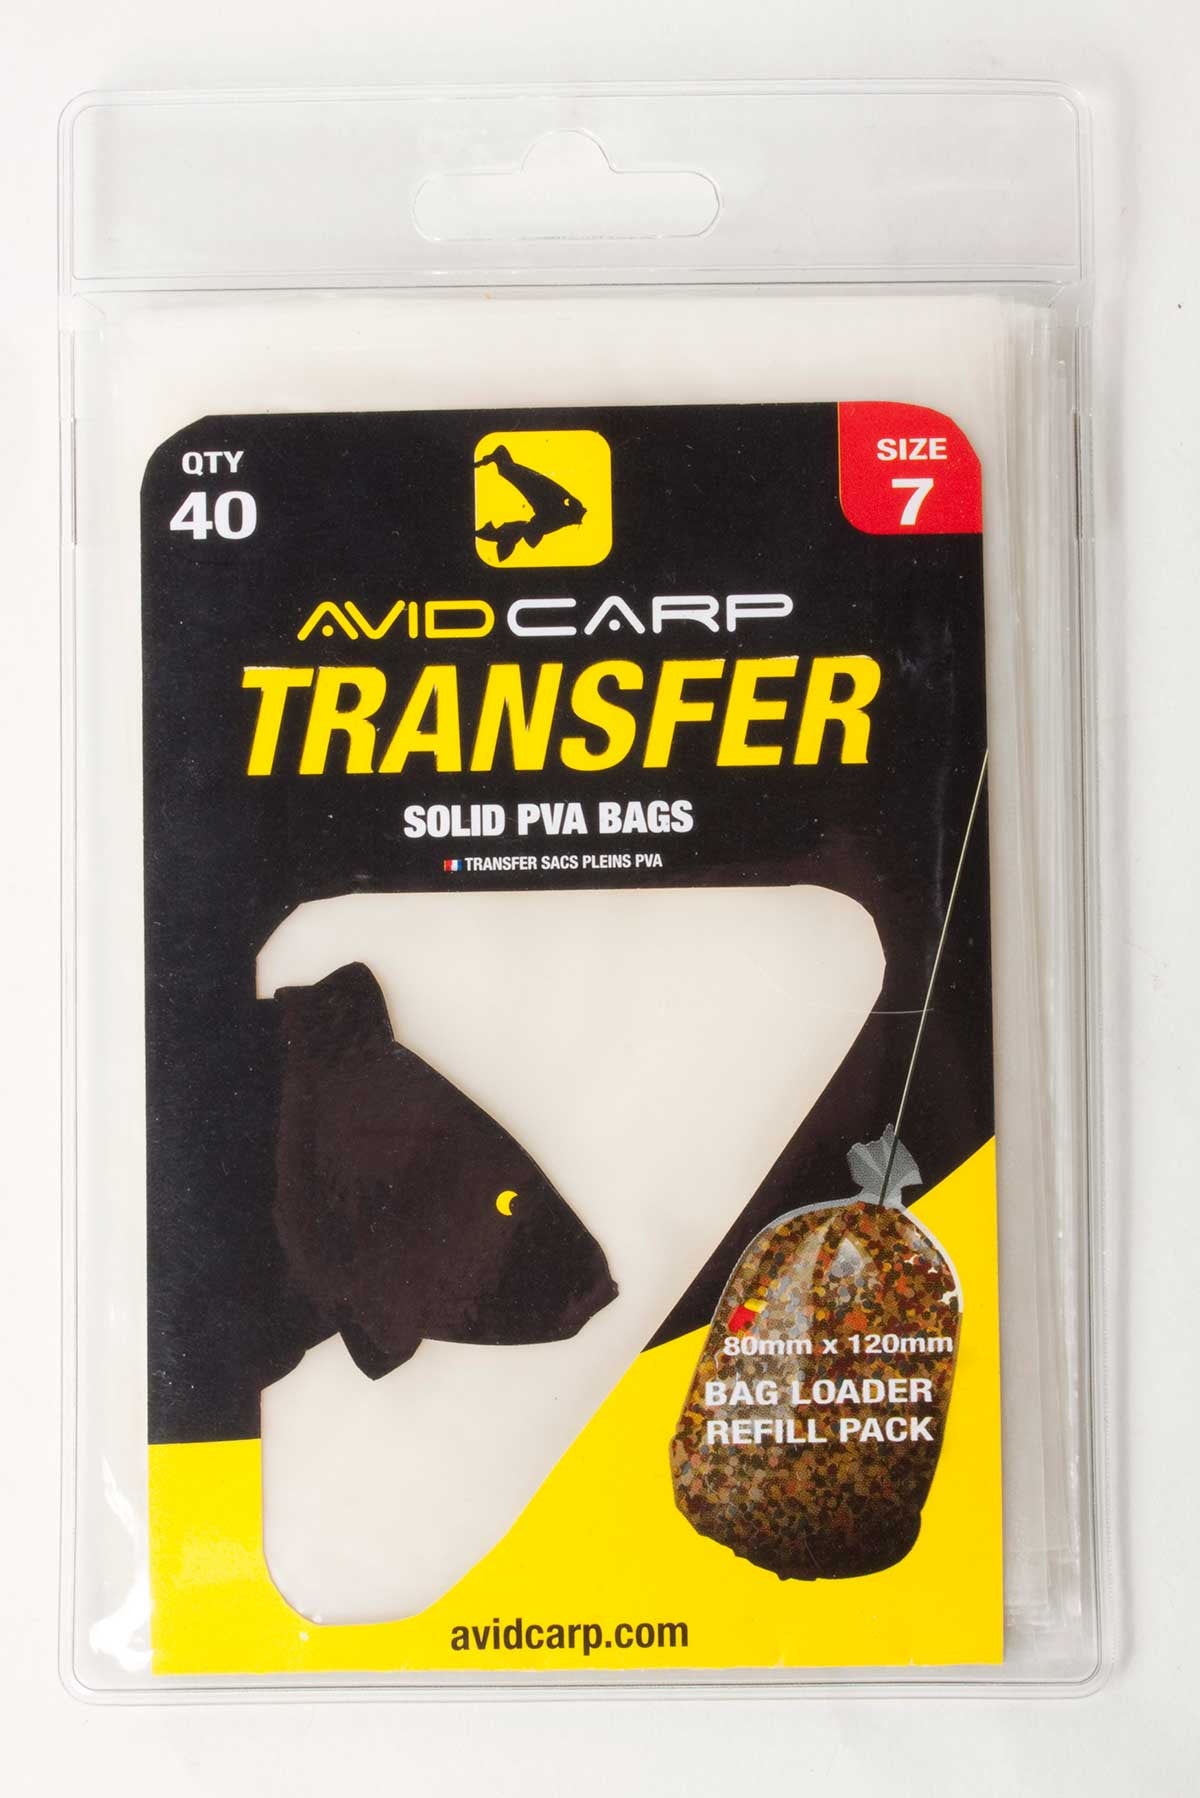 Avid Carp Transfer Solid PVA Bags ** size 6 clearout **